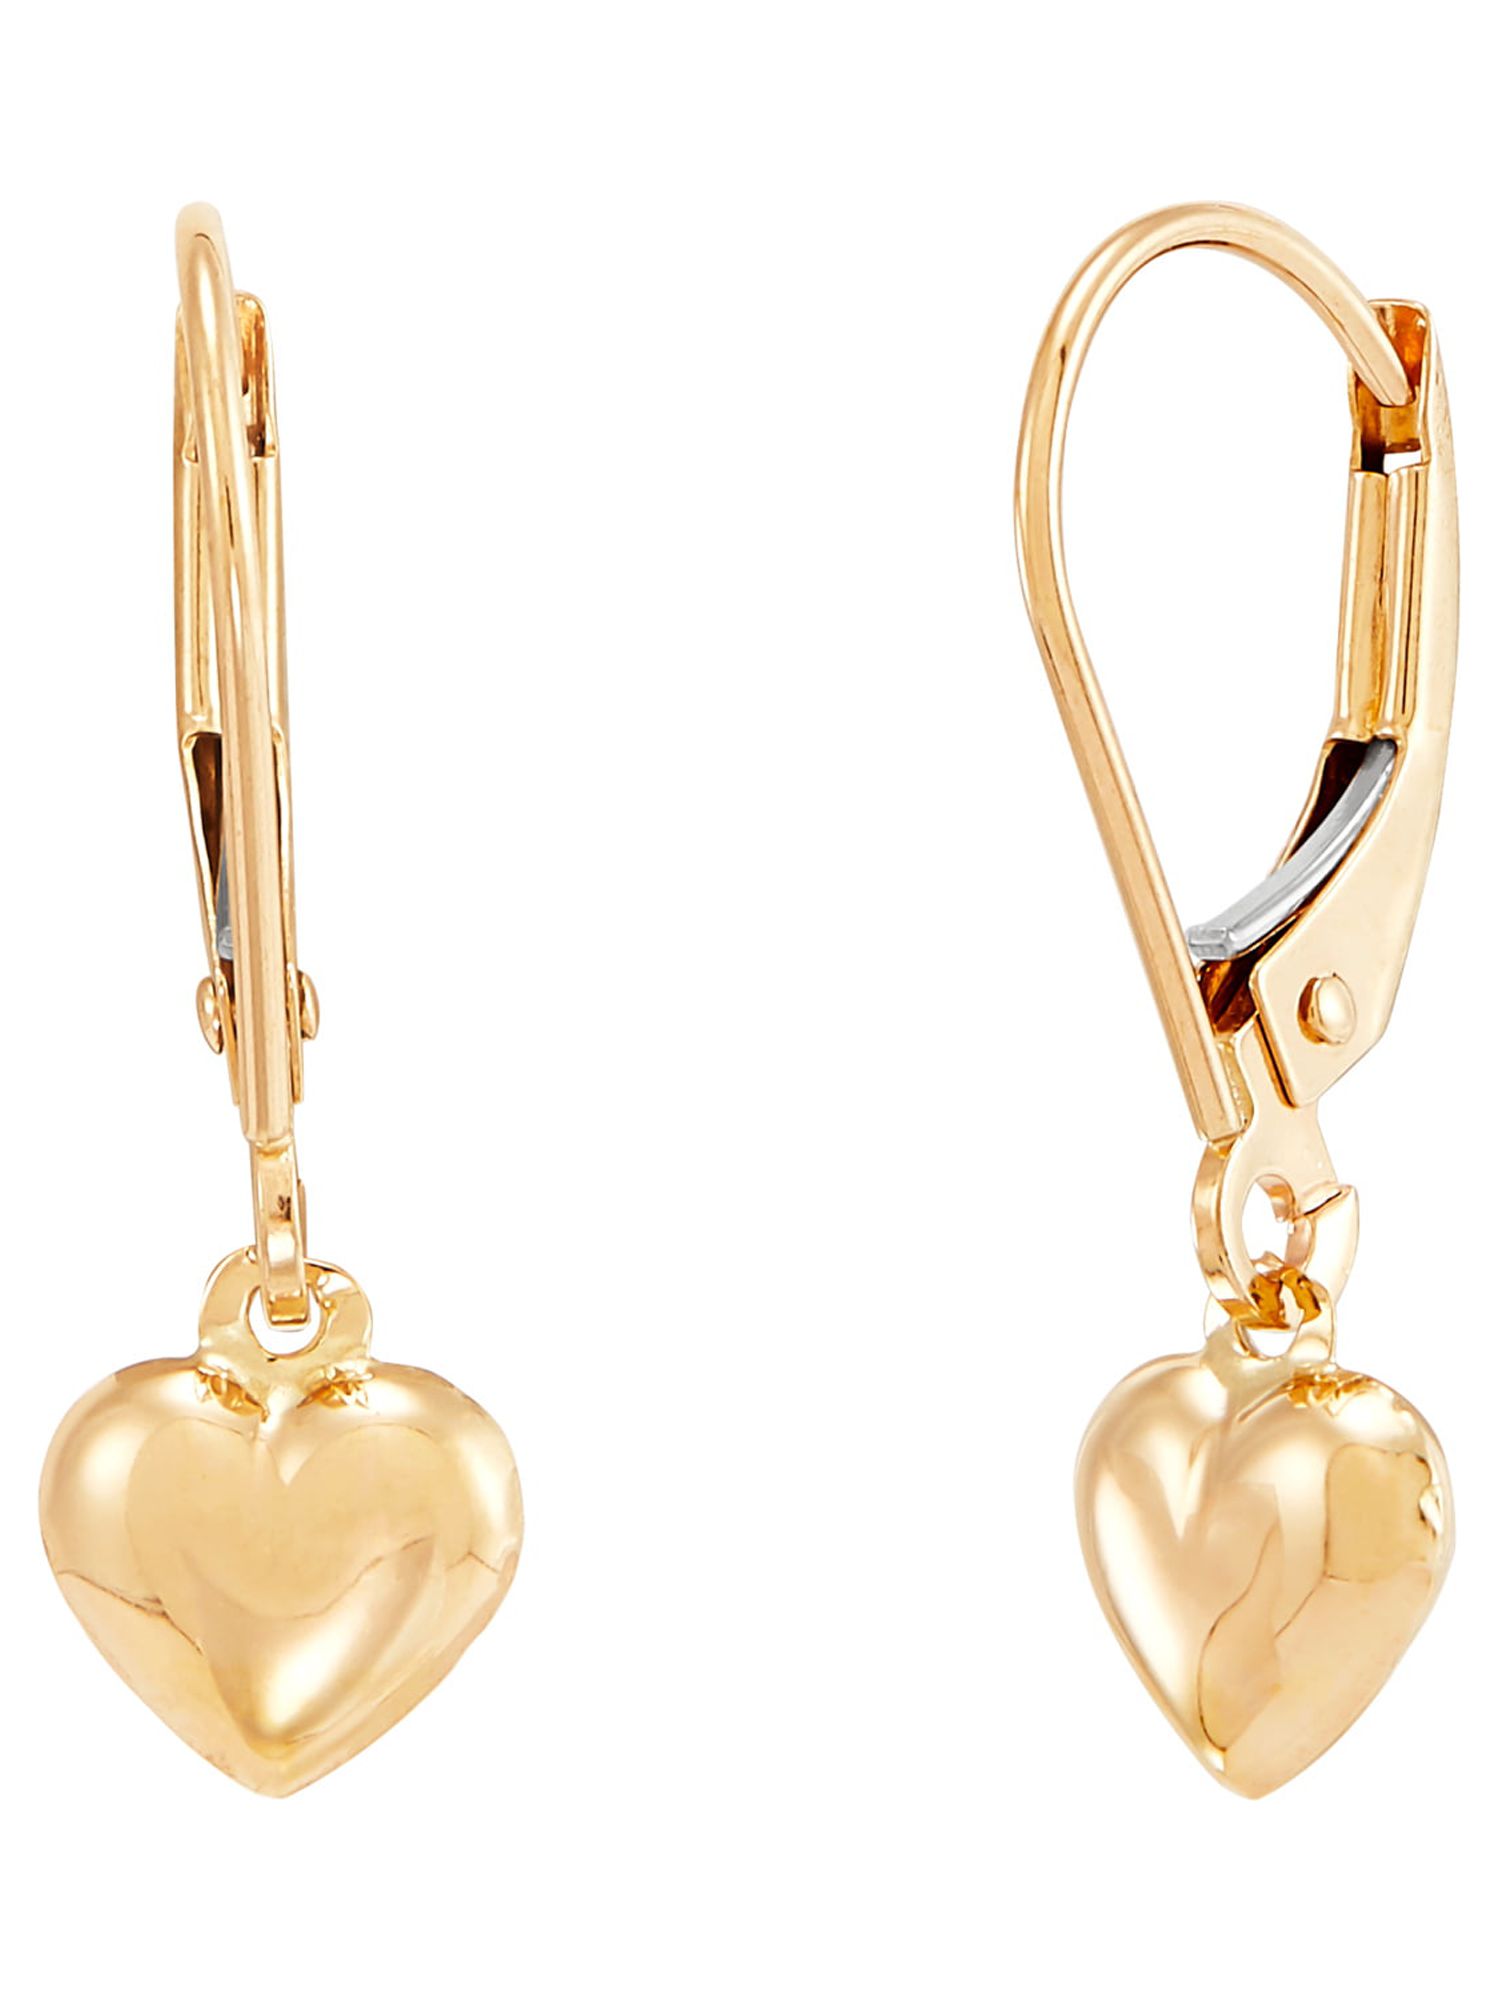 Brilliance Fine Jewelry 10K Yellow Gold Hollow Heart Leverback Earrings - image 3 of 4